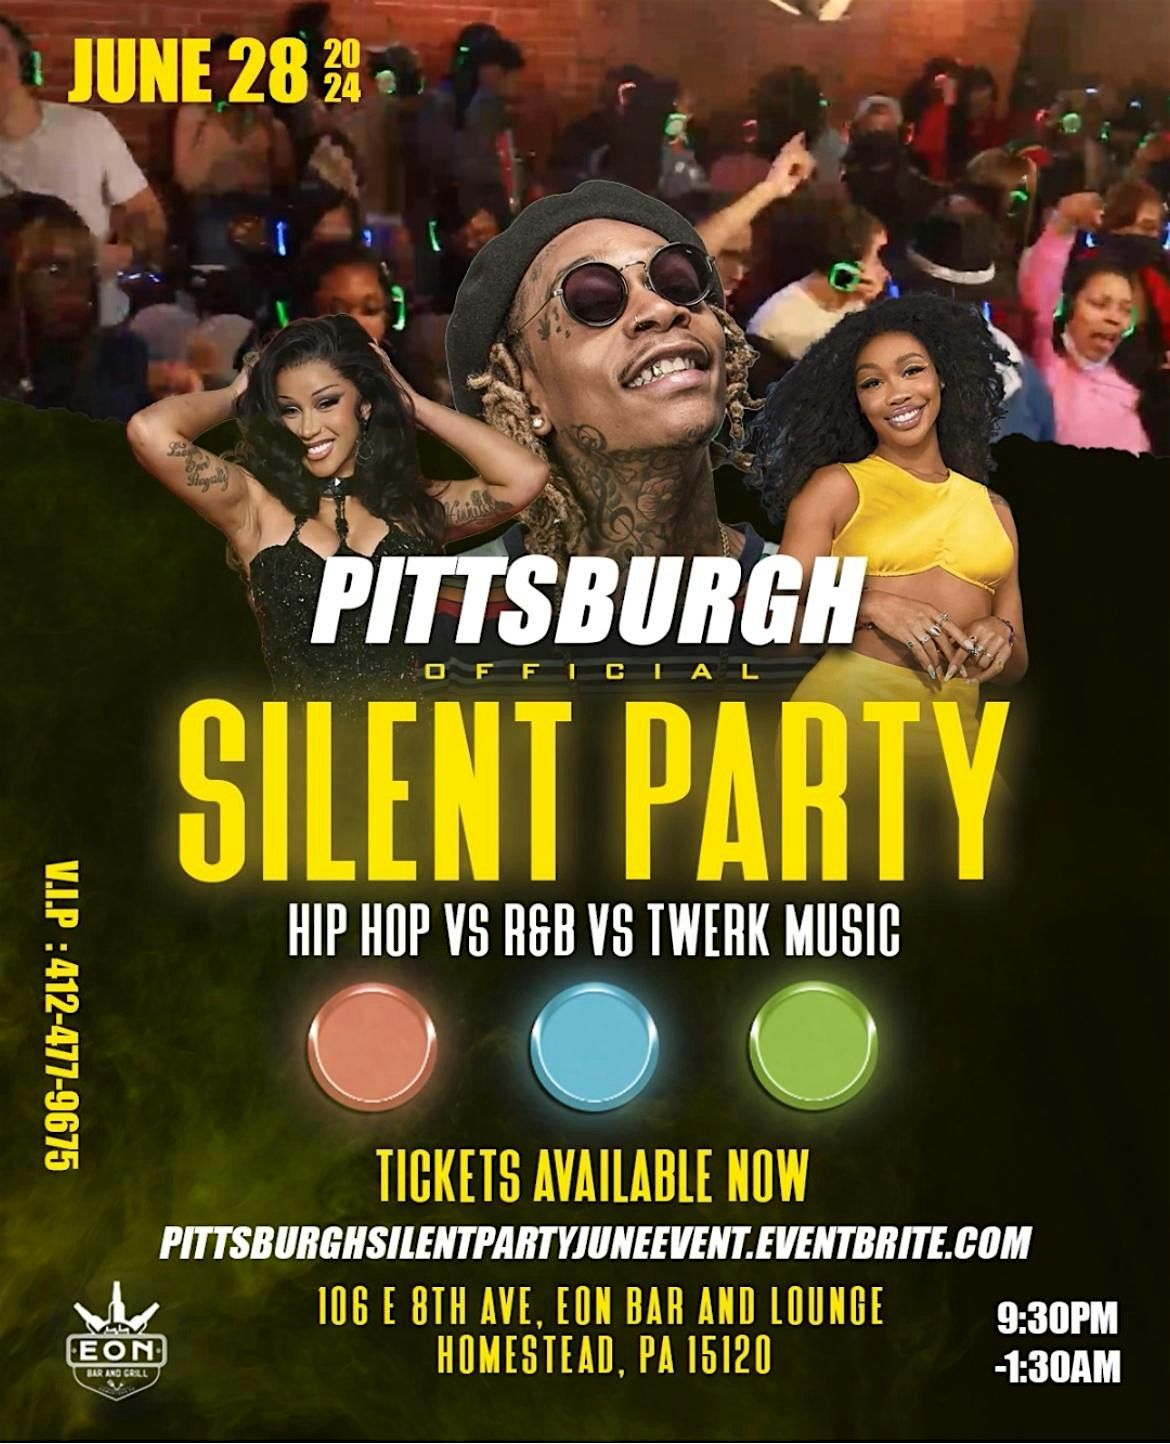 PITTSBURGH OFFICIAL SILENT PARTY